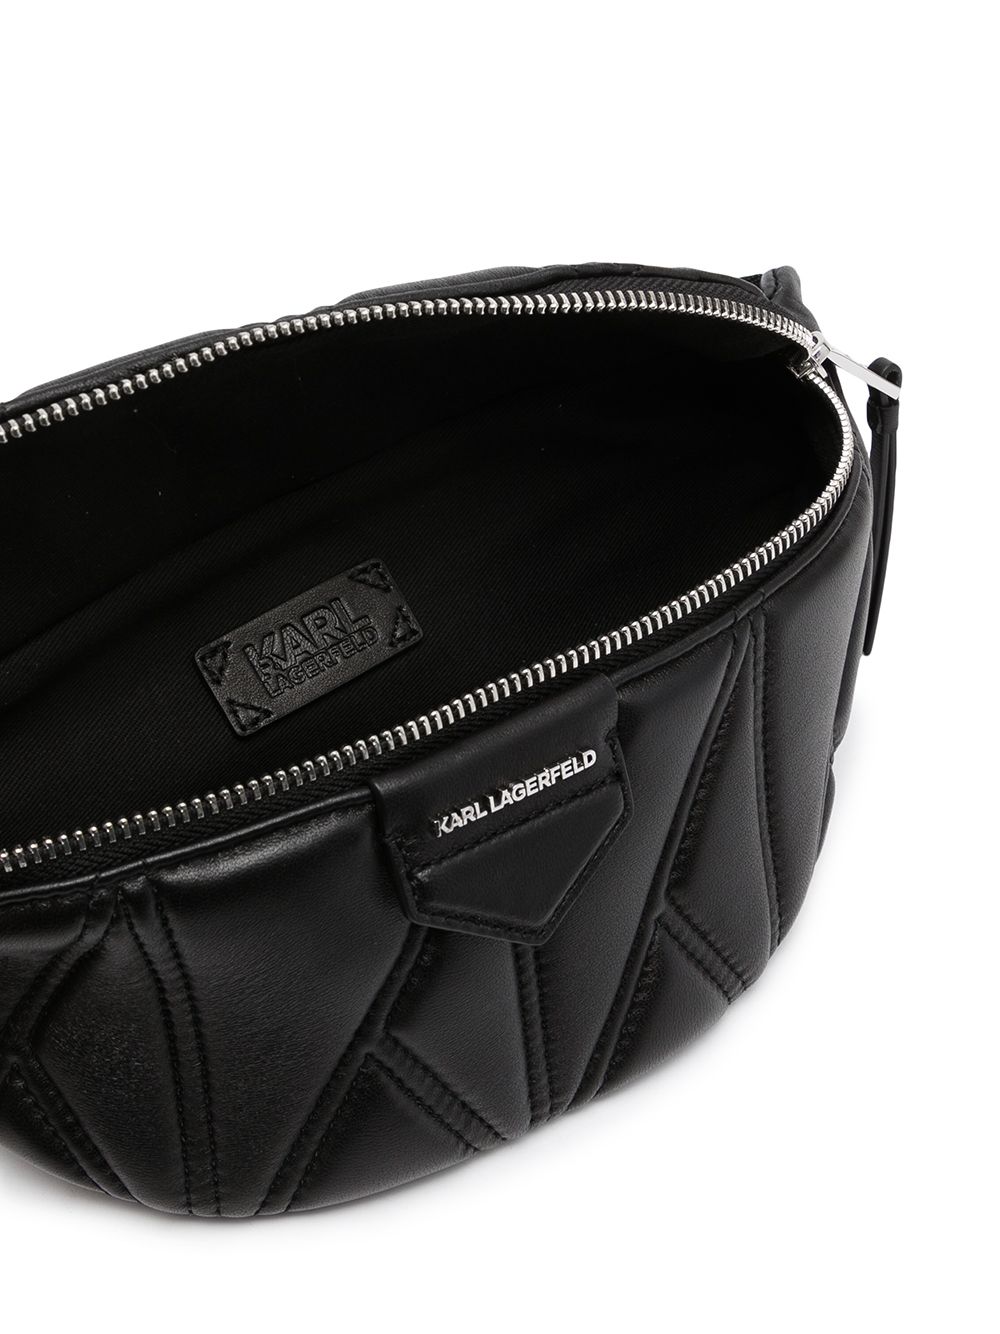 Shop Karl Lagerfeld Studio belt bag with Express Delivery - FARFETCH